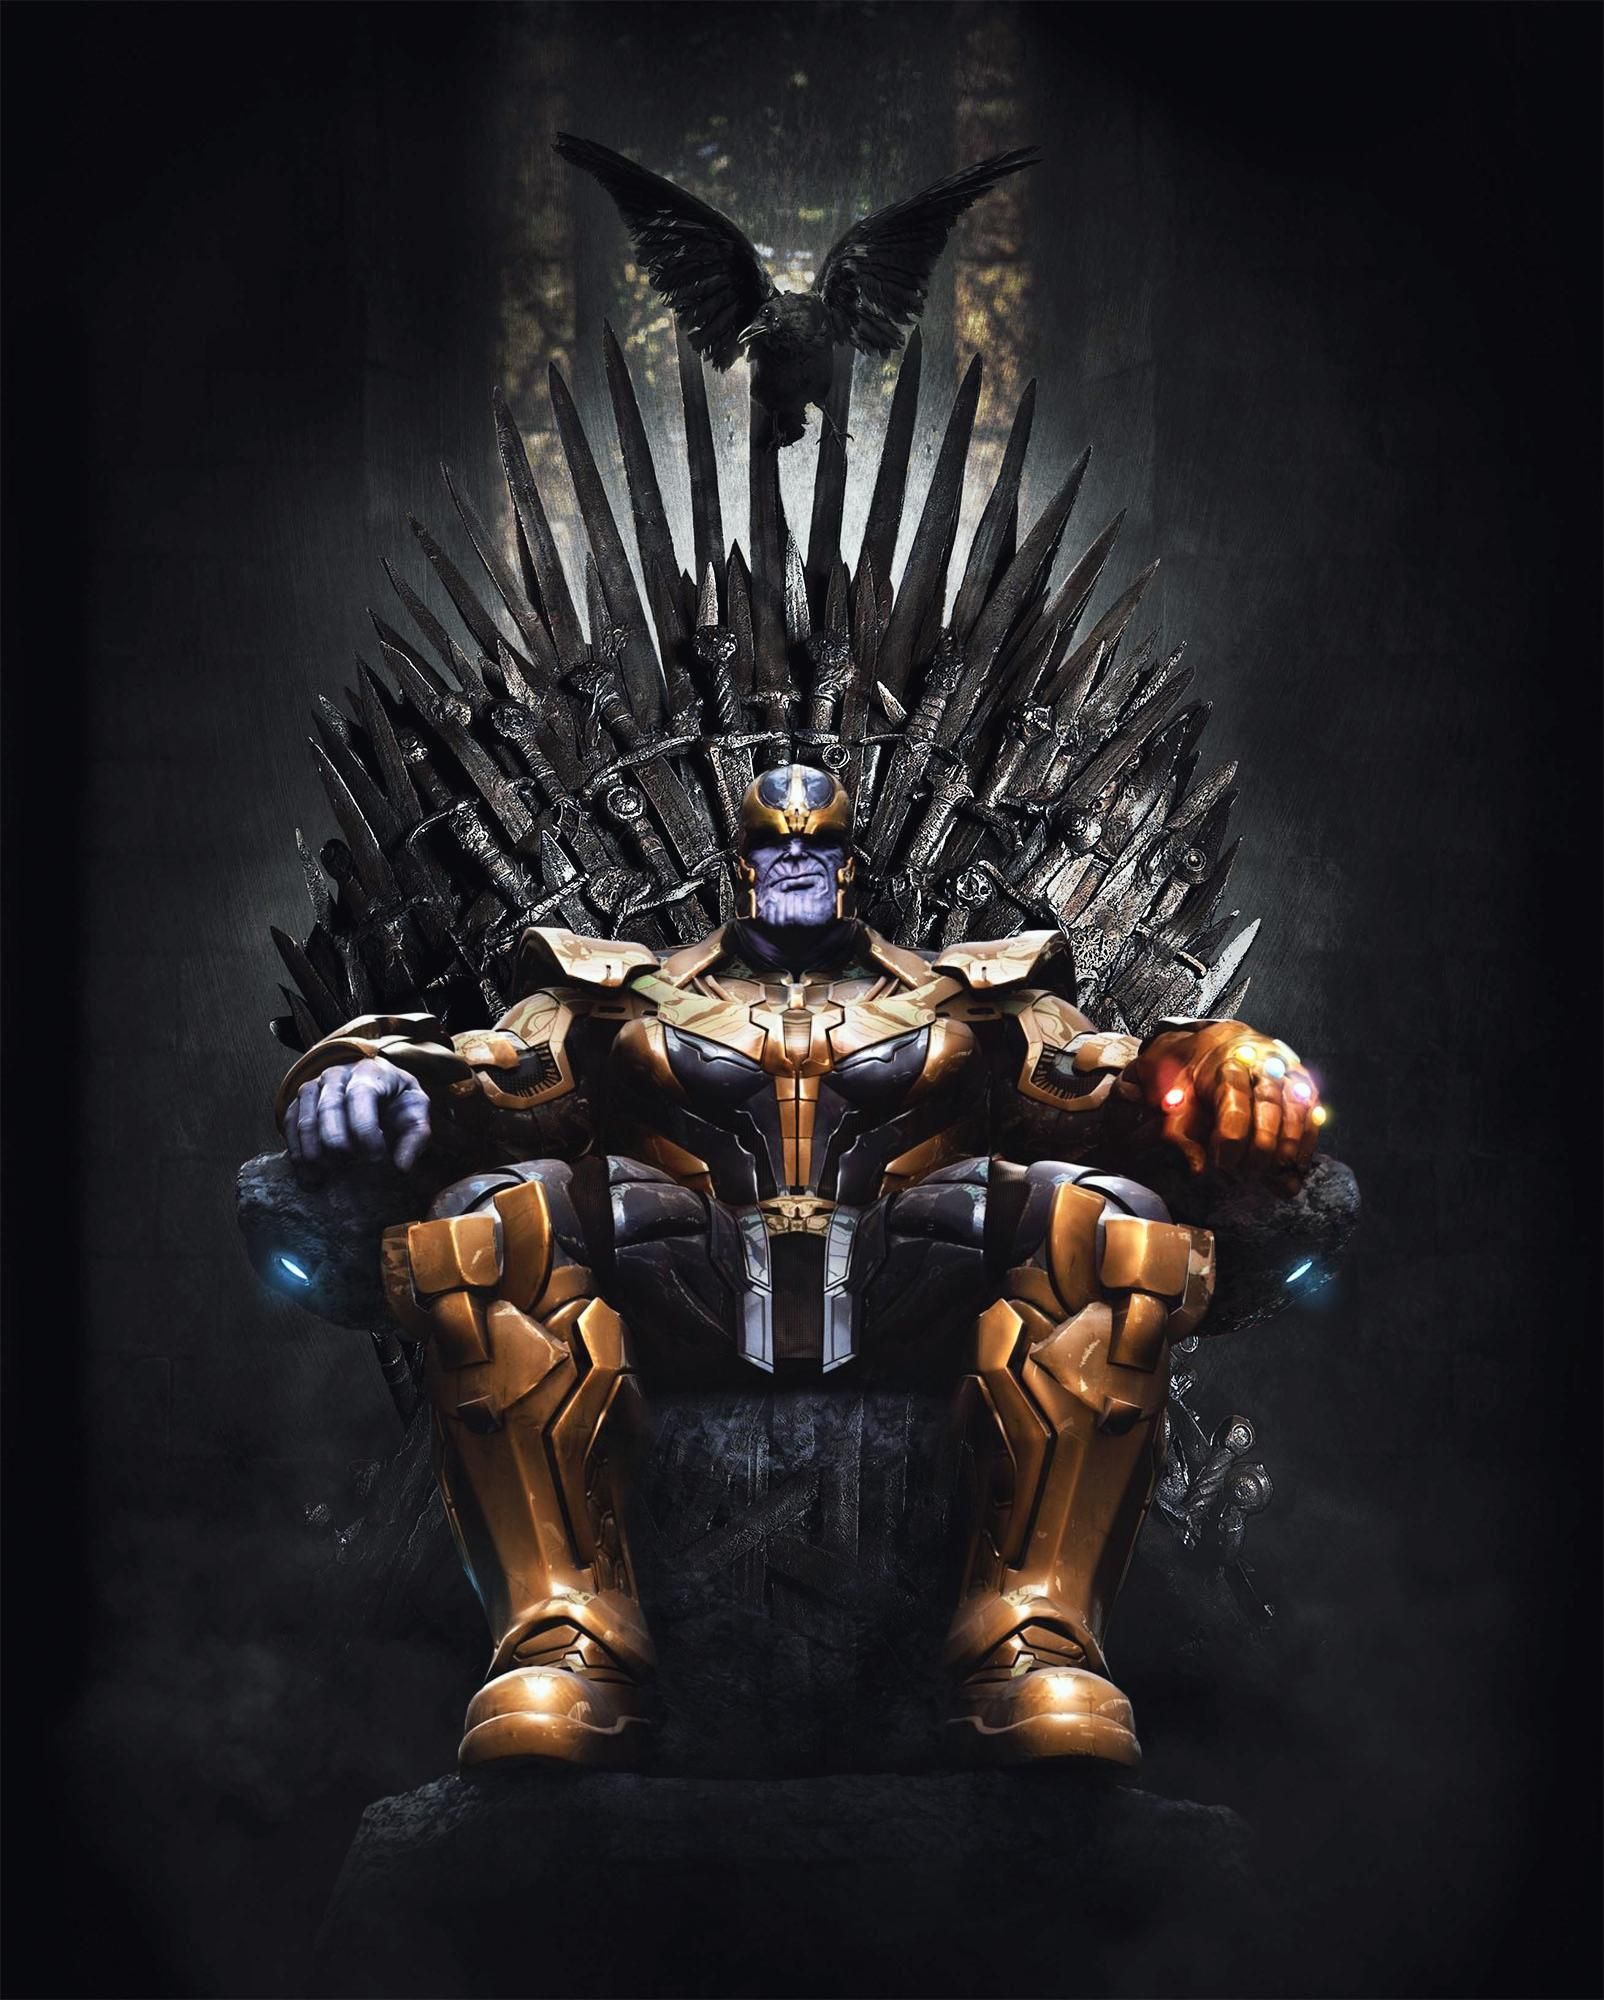 NO SPOILERS Thanos sitting on the Iron Throne. Avengers wallpaper, Marvel characters, Marvel villains